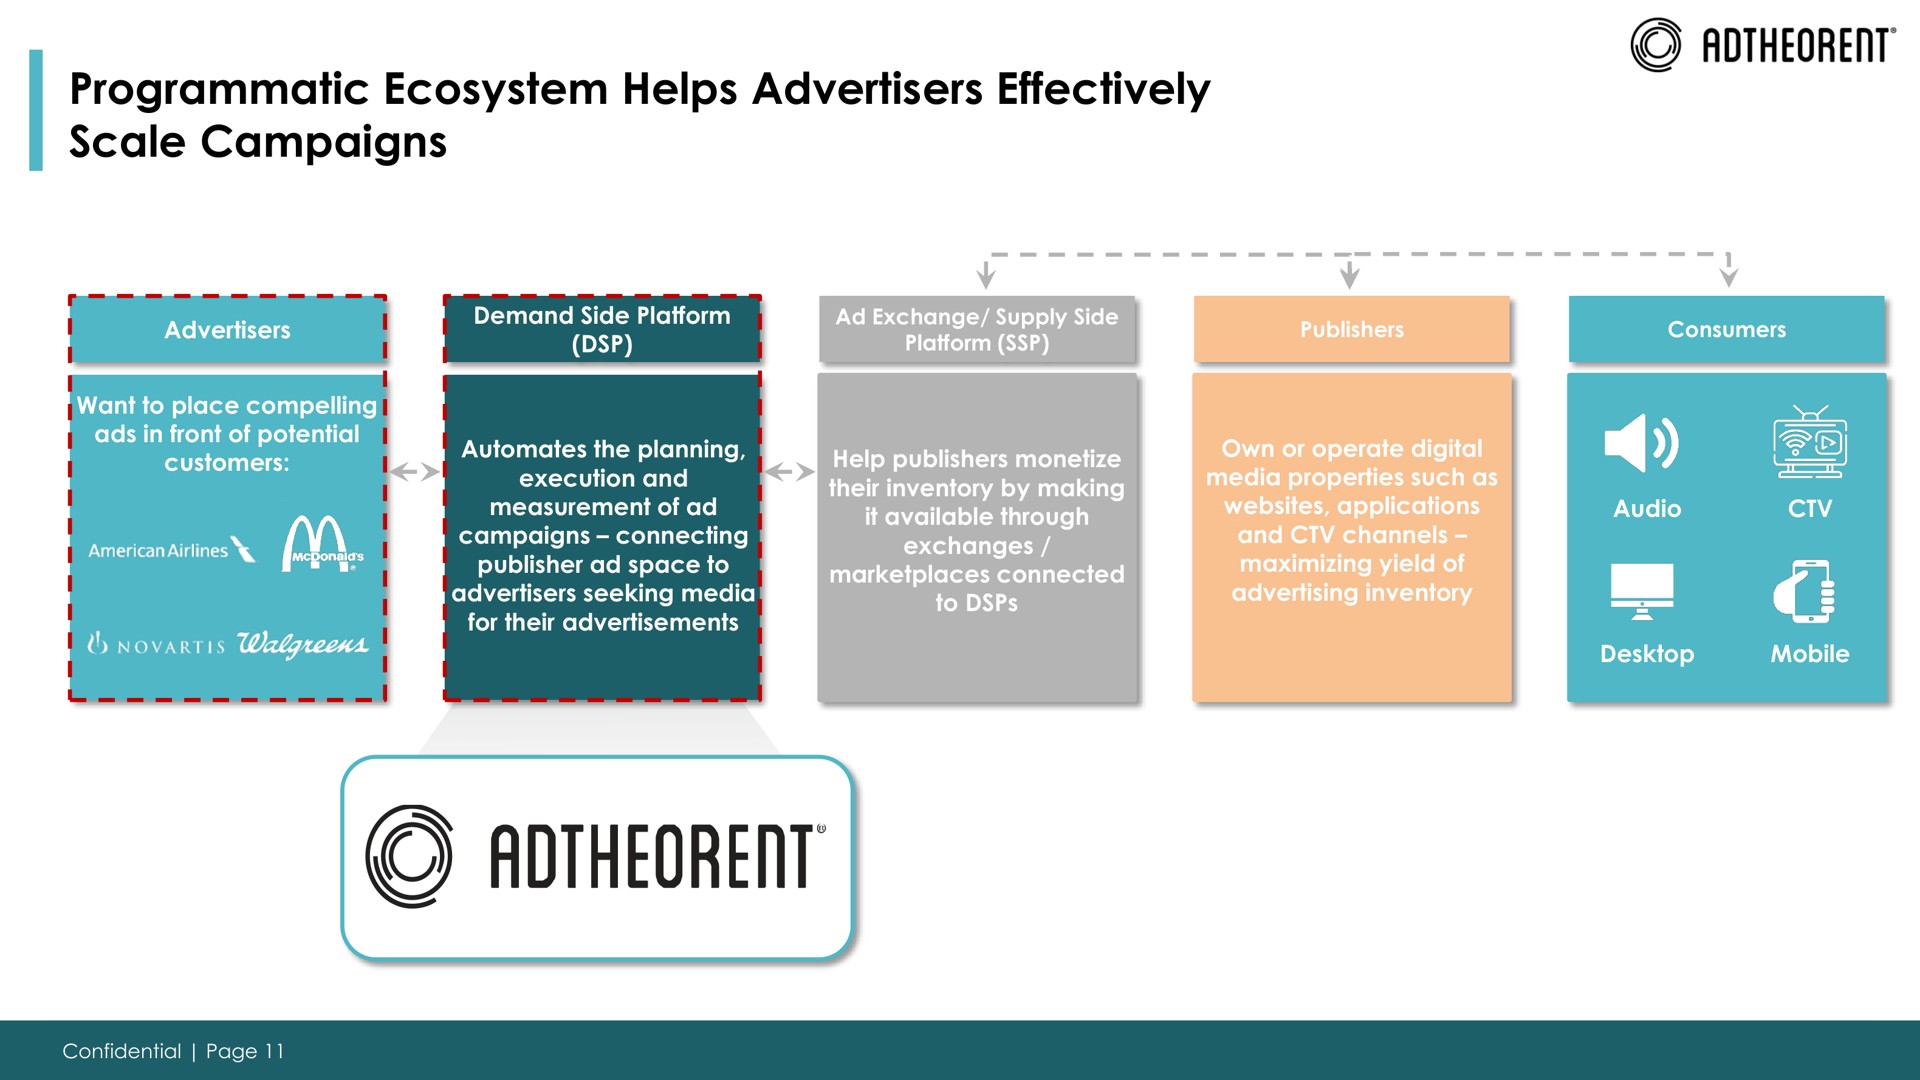 programmatic ecosystem helps advertisers effectively scale campaigns | Adtheorent